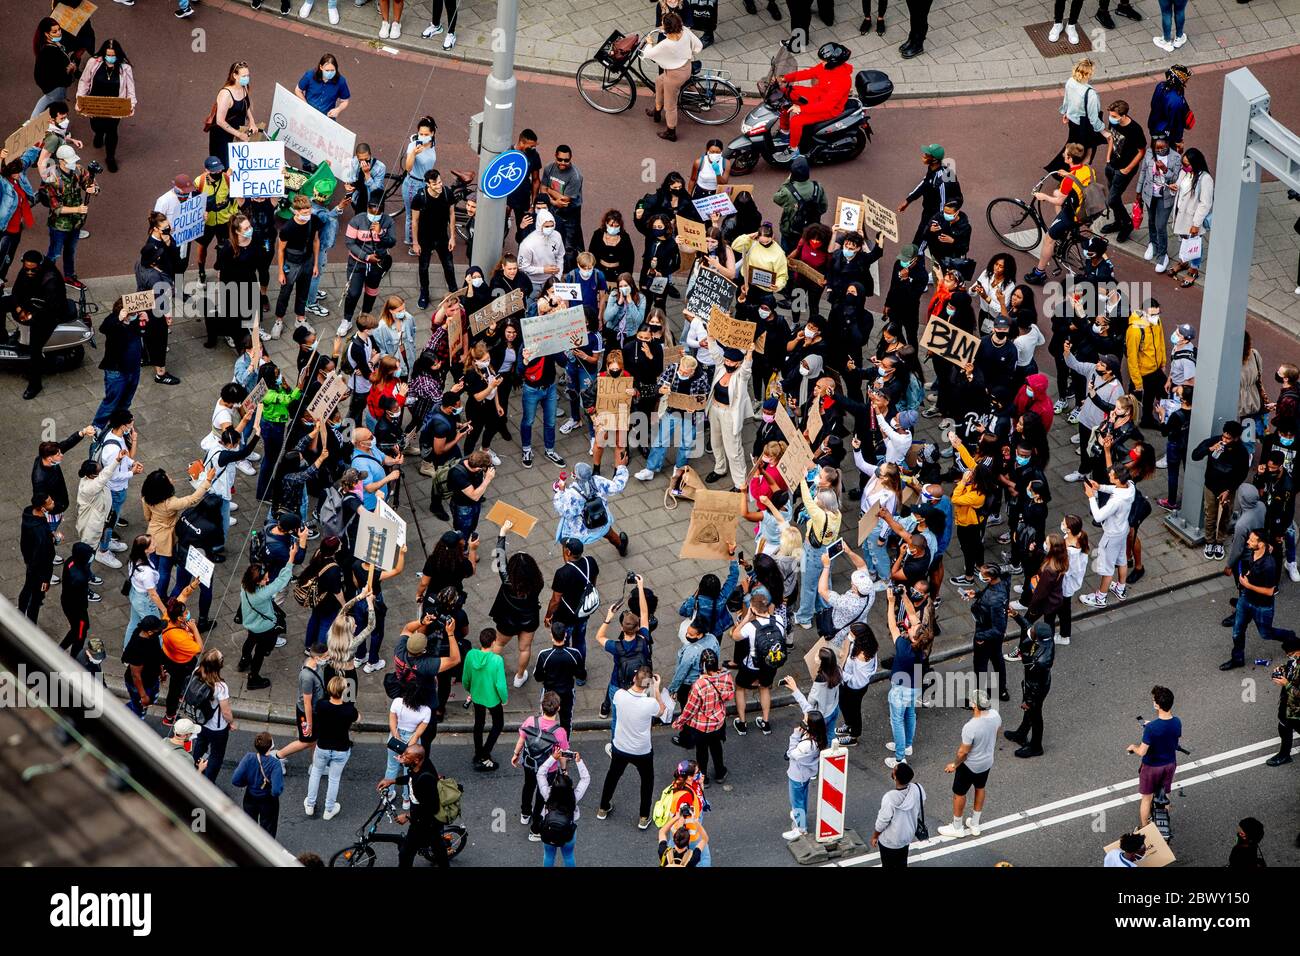 Thousands of people line Erasmus Bridge as they take part in a demonstration to protest against the recent killing of George Floyd, police violence and institutionalized racism. Floyd, a black man, died in police custody in Minneapolis, U.S.A., after being restrained by police officers on May 25, 2020. Stock Photo